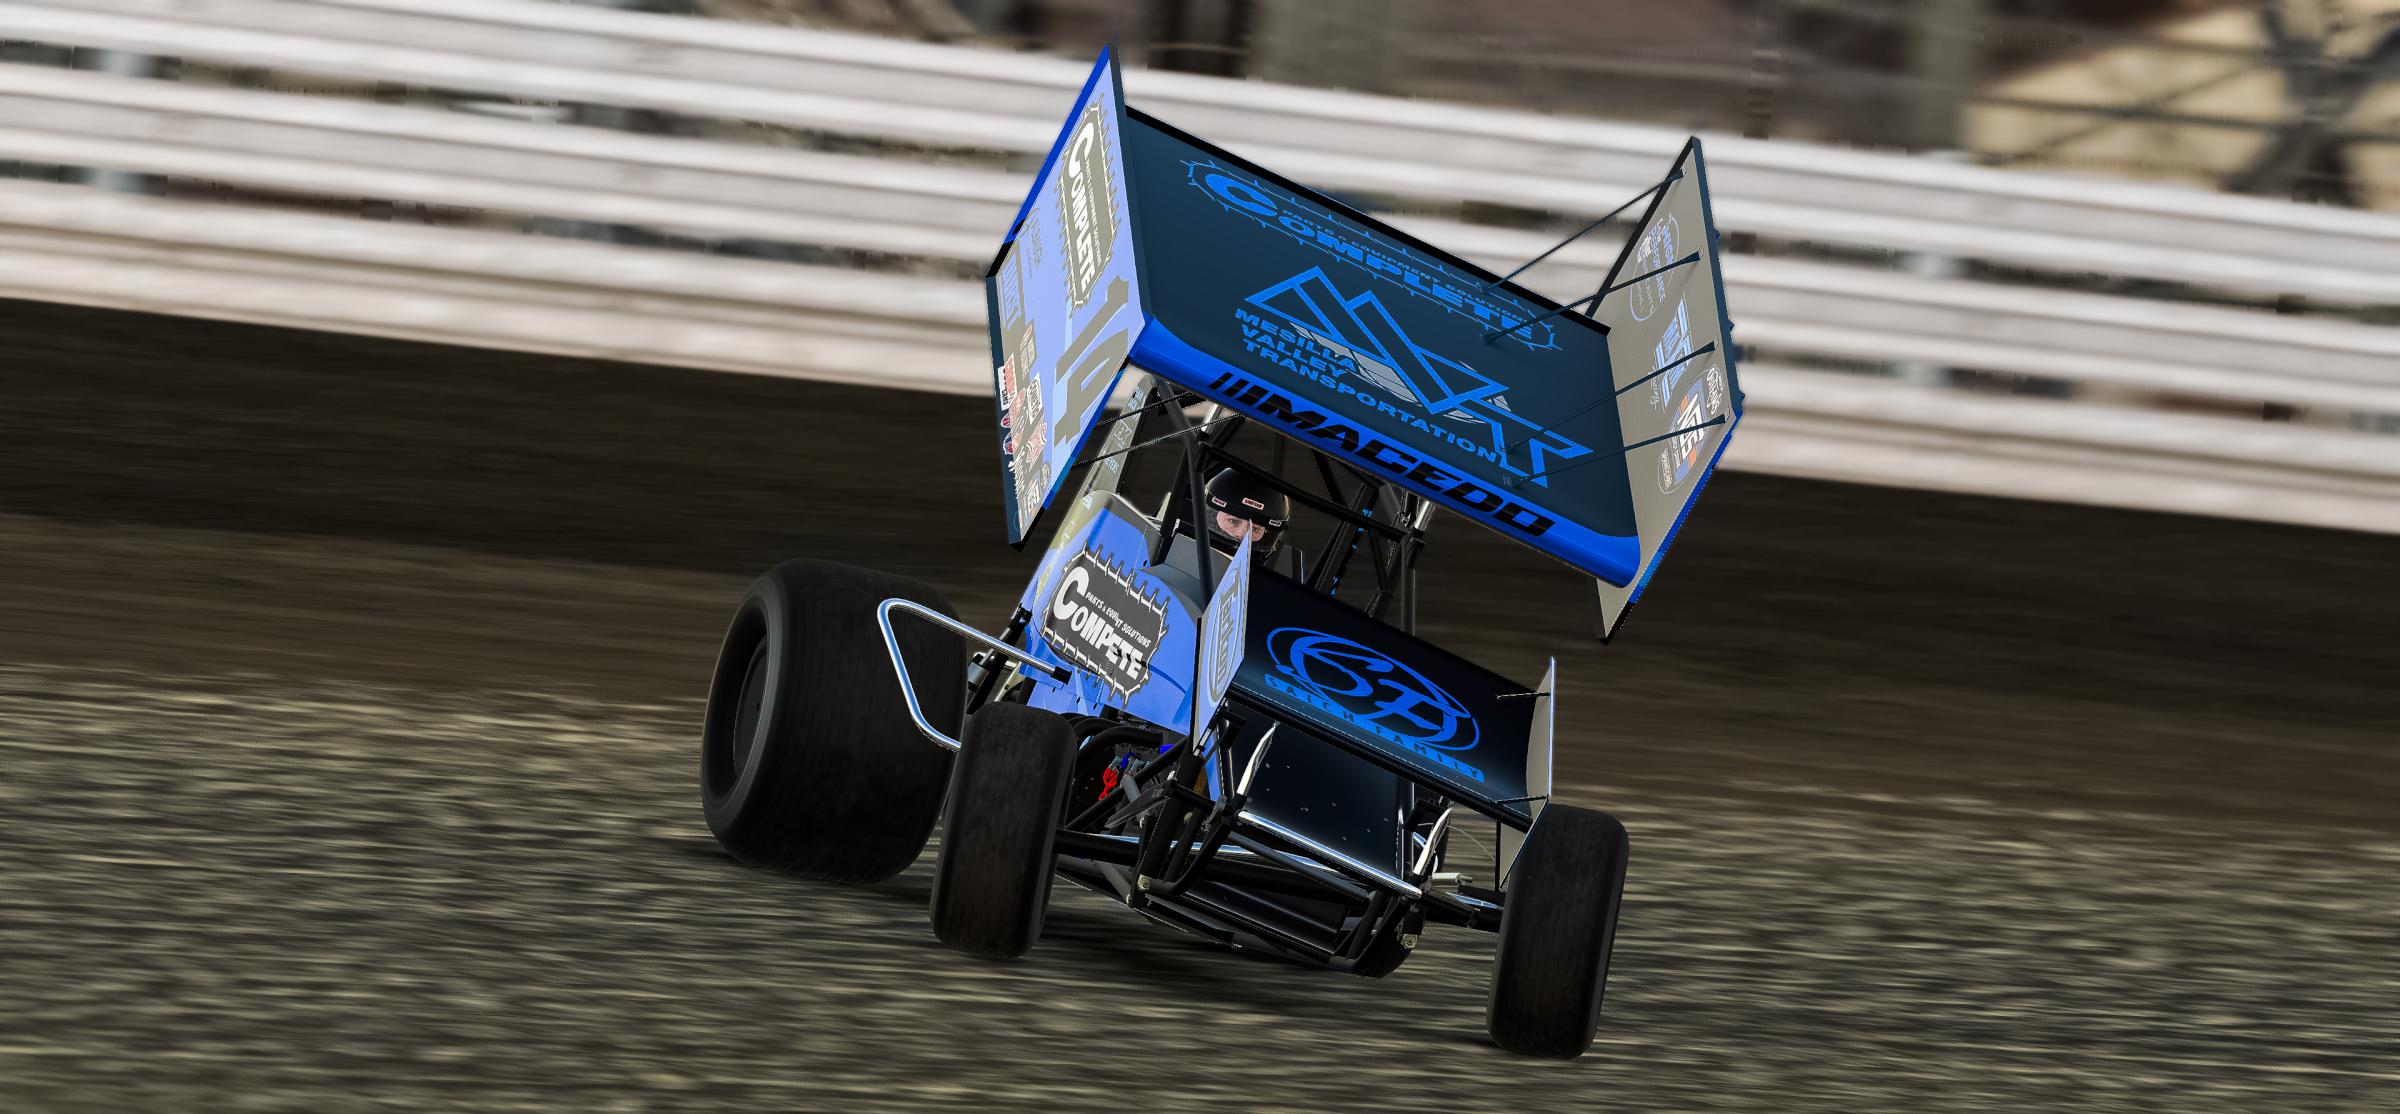 Preview of 2022 Cole Macedo Knoxville Nationals Sprint Car by Koleton Anderson